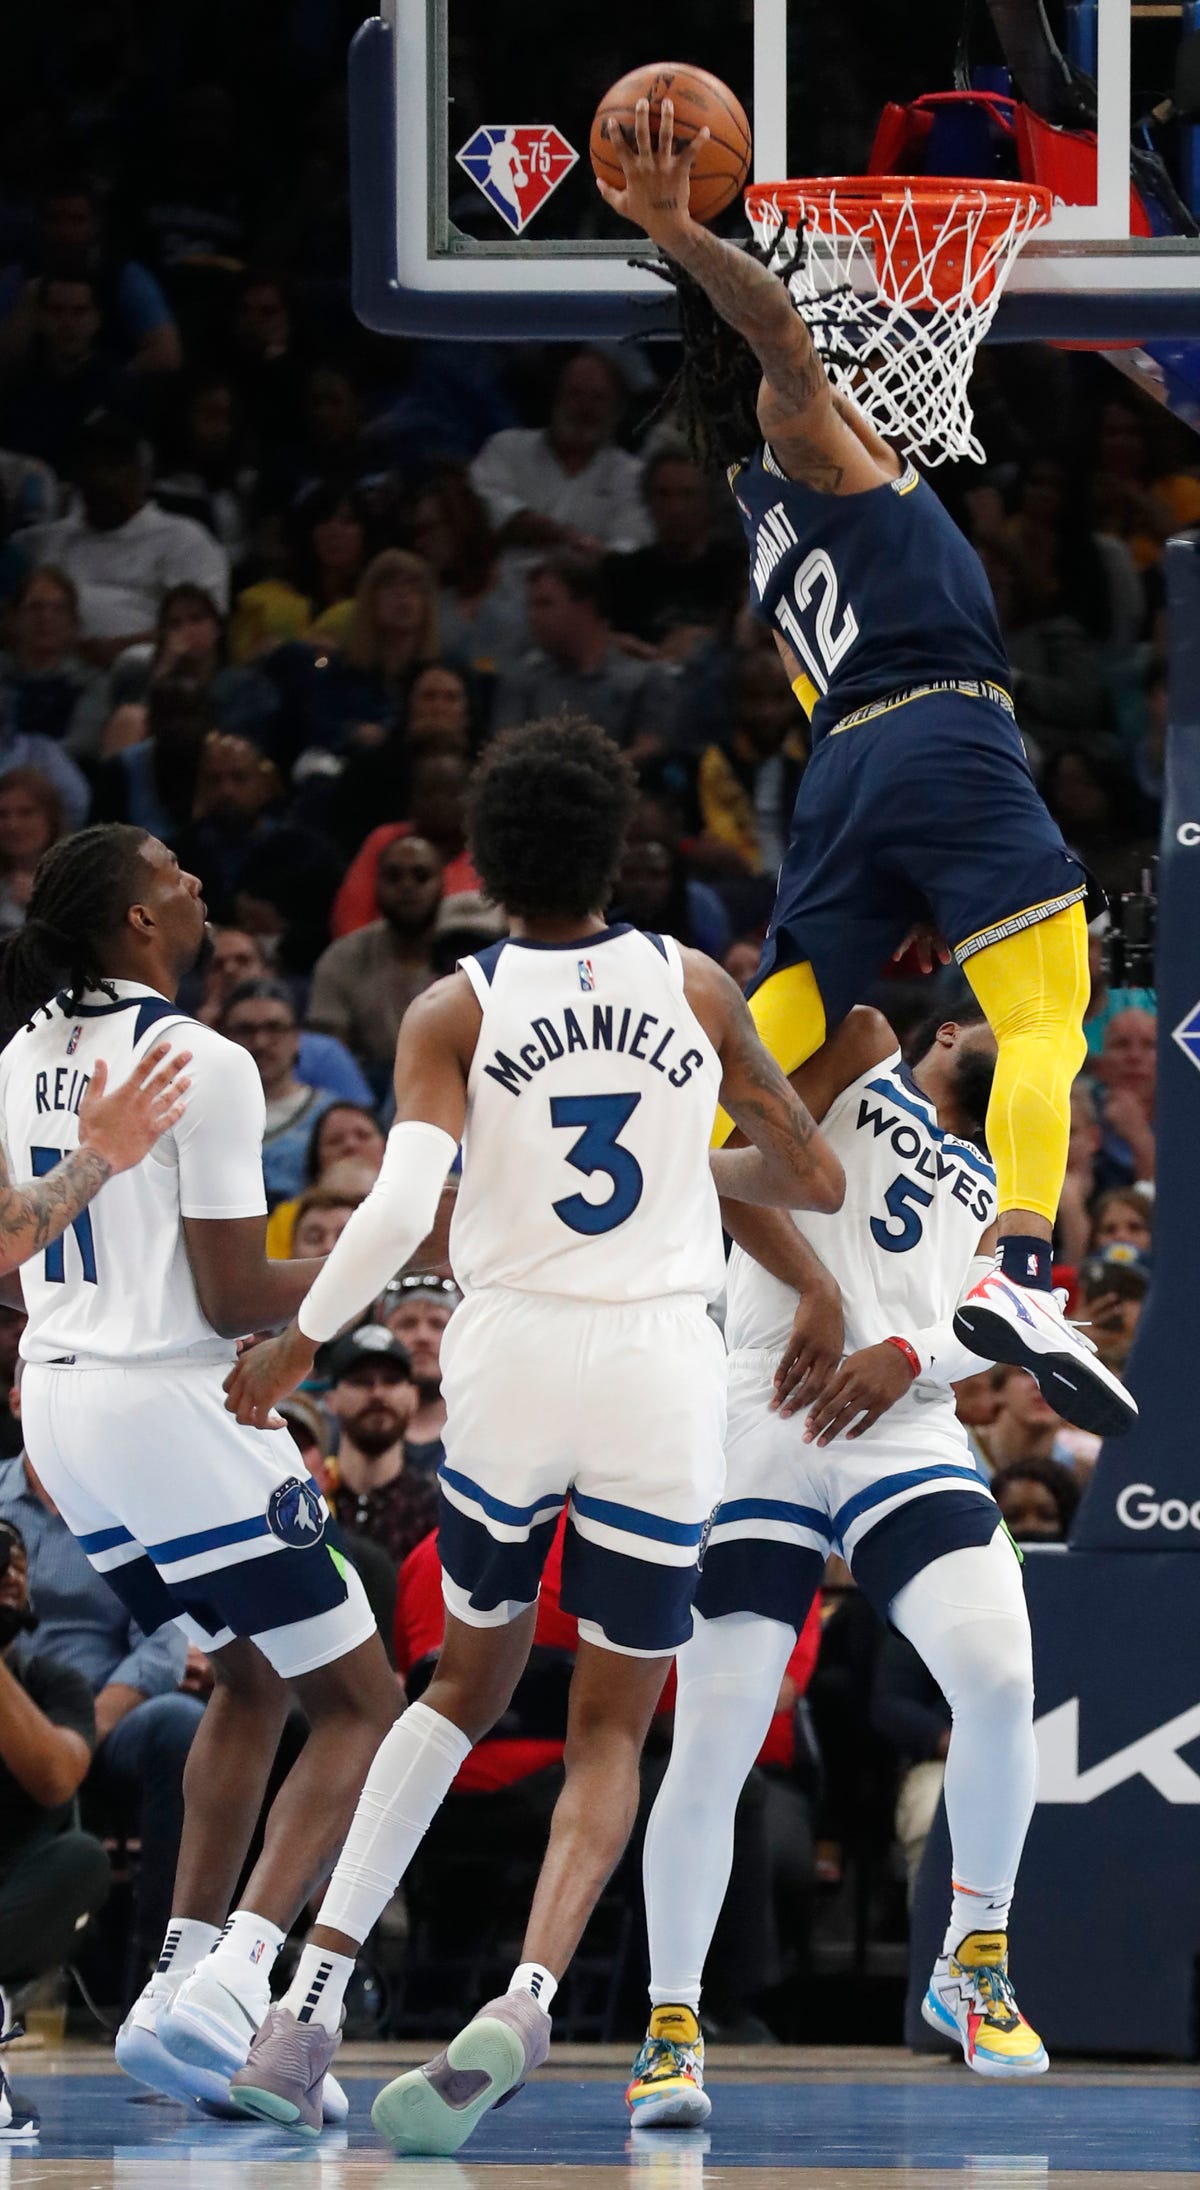 Ja Morant's posterizing playoff dunk was epic. But was it his best?